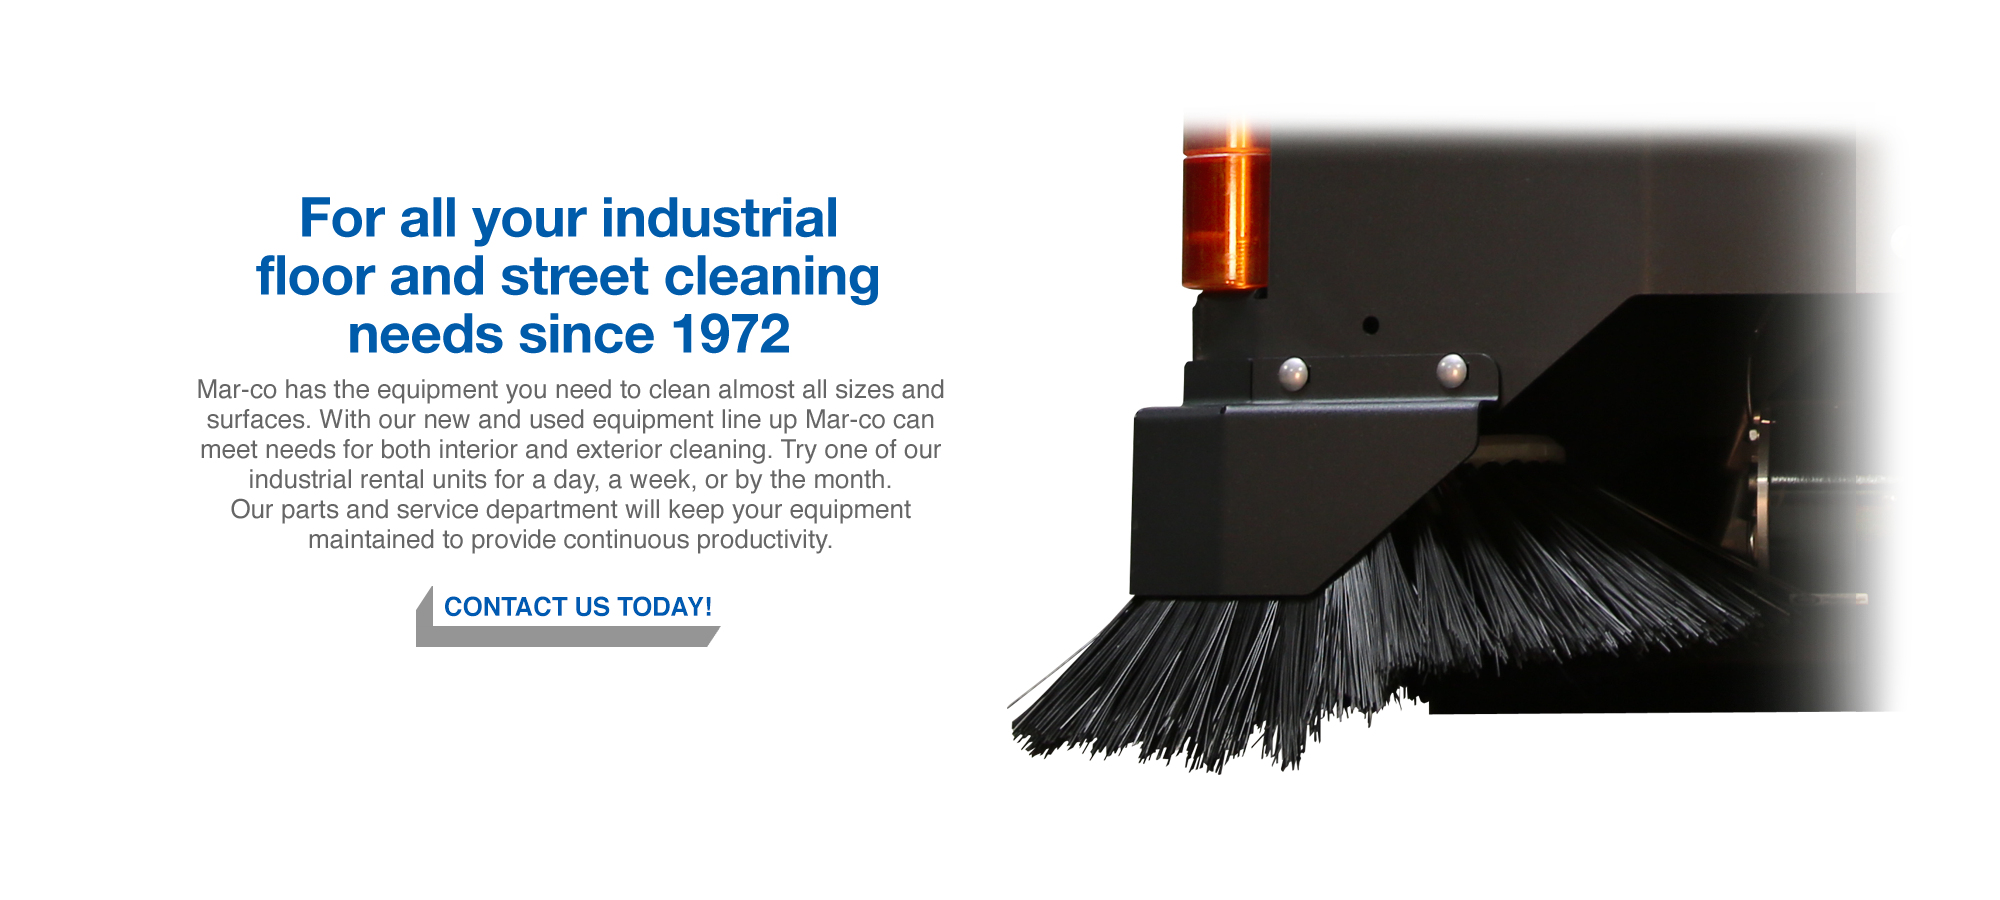 For all your industrial floor and street cleaning needs since 1972